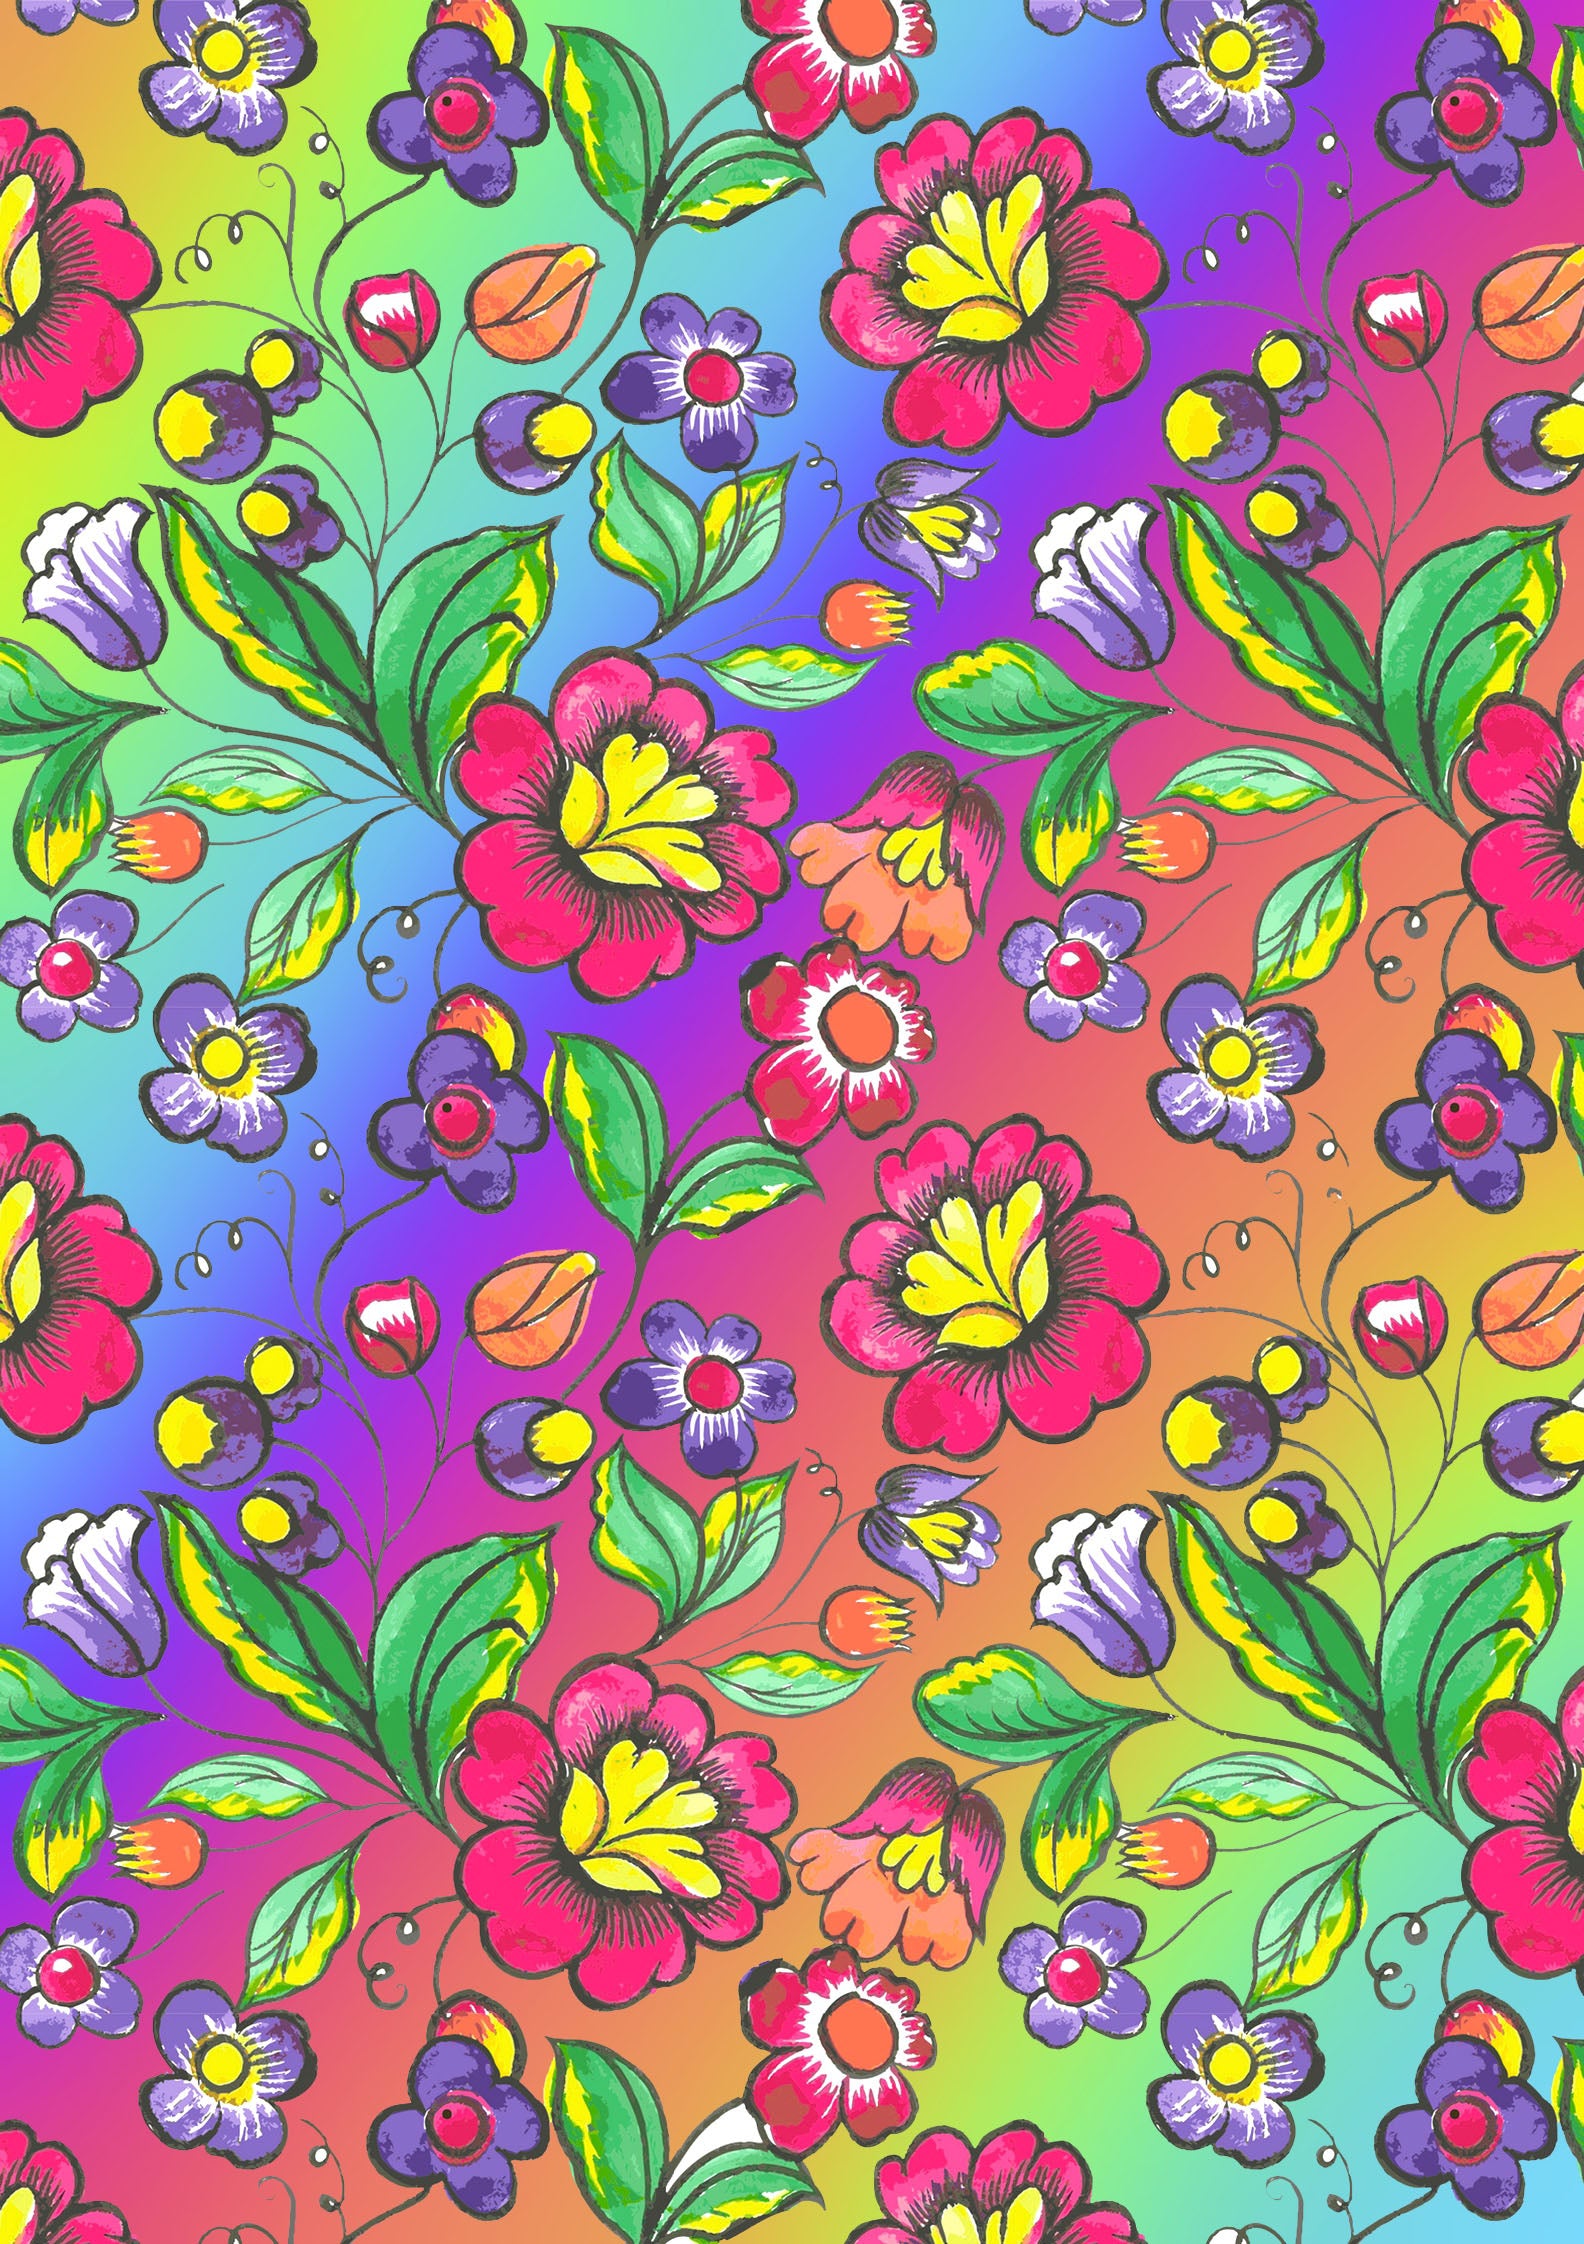 12 x 17 BRAND NEW! Rainbow Floral HTV Flowers Mexico Mother's Day - Print  Background Pattern HTV Sheet